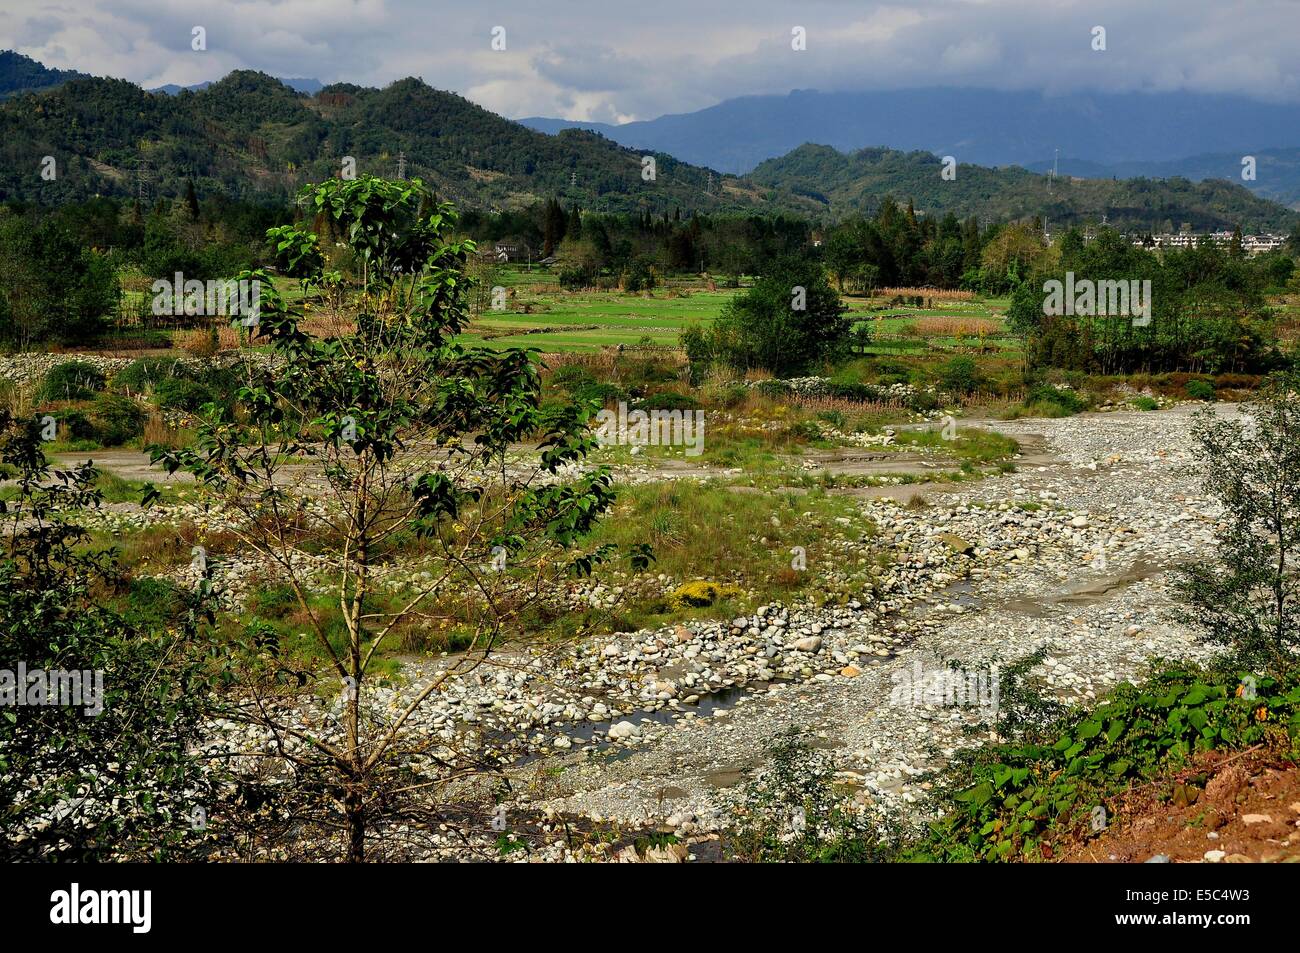 SICHUAN PROVINCE, CHINA:  View of the rock-strewn Jianjiang River, farm fields, and distant mountains Stock Photo